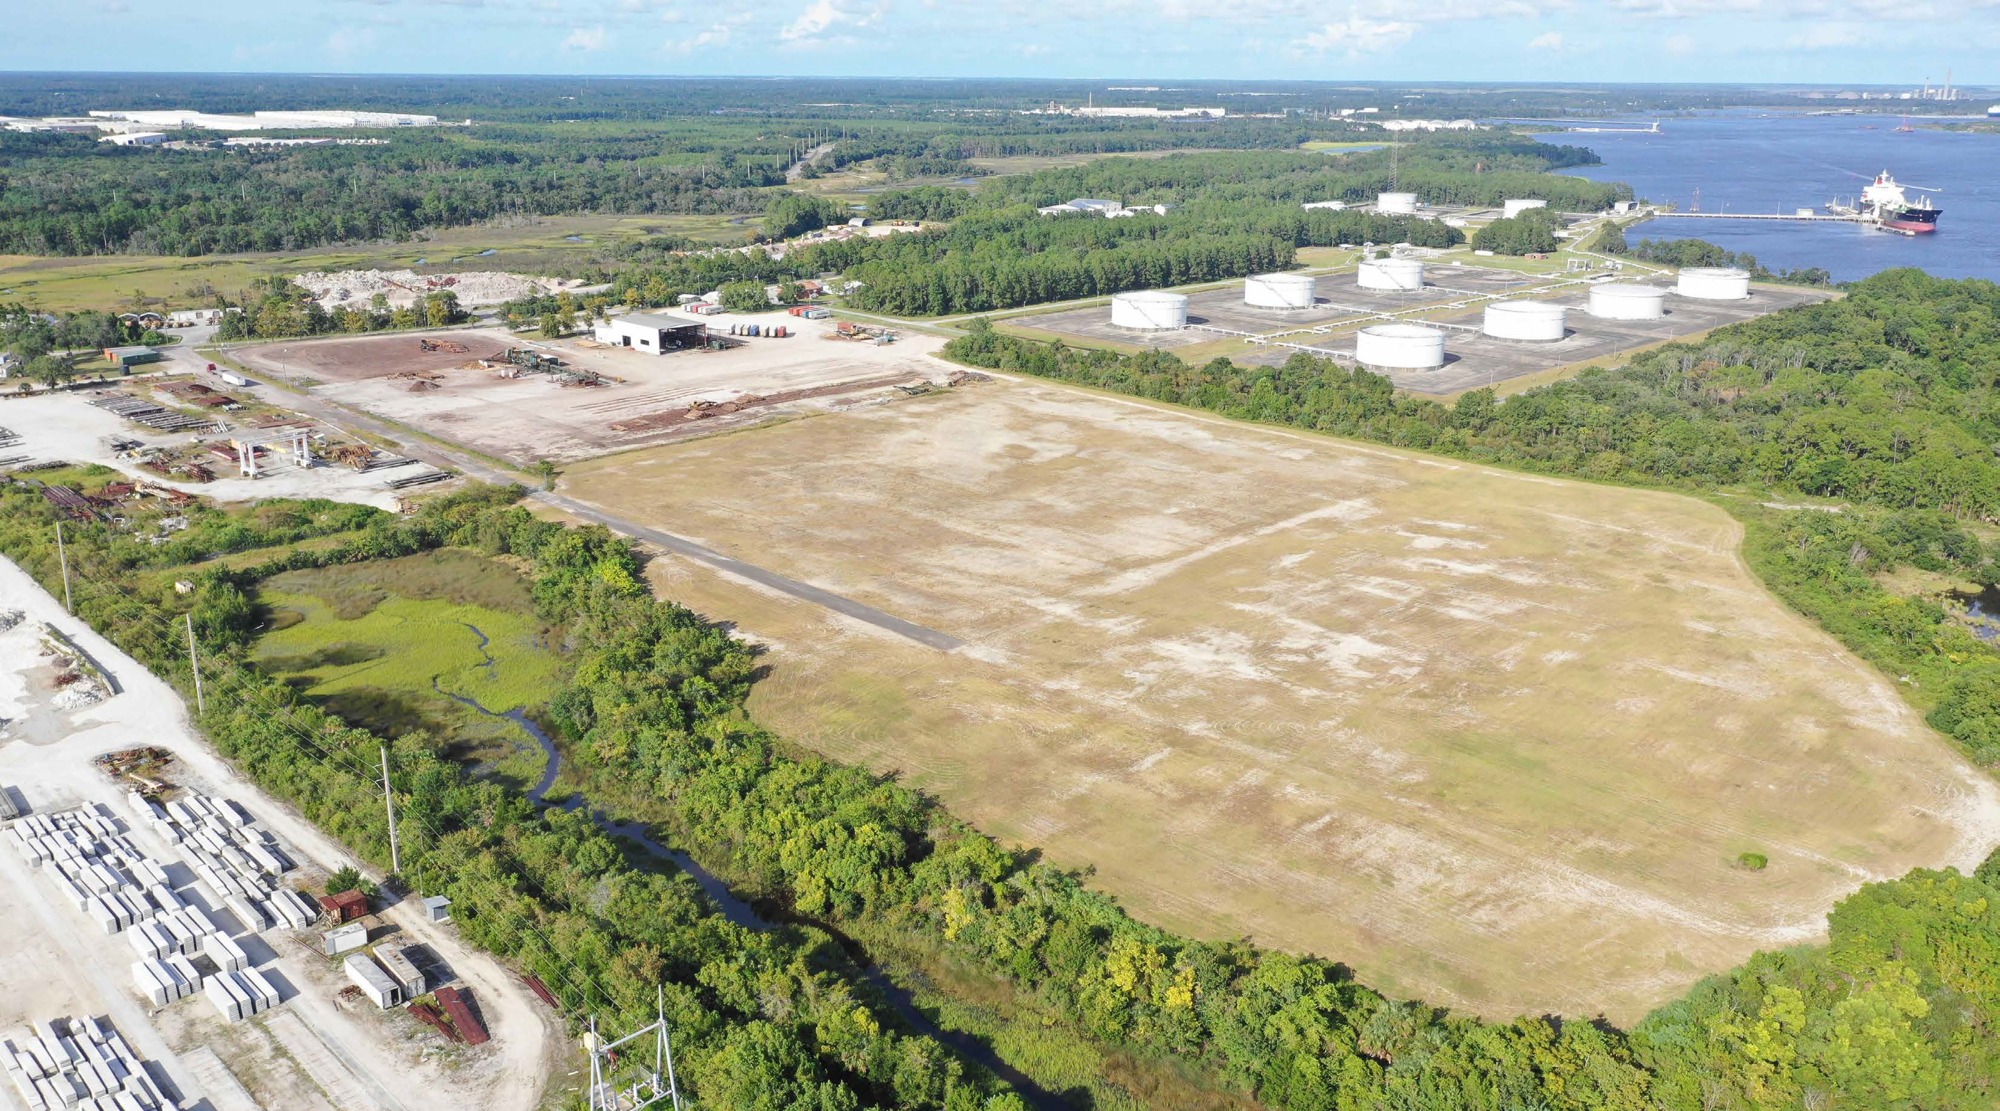 Another 24 acres is available on the 44.5-acre usable parcel.